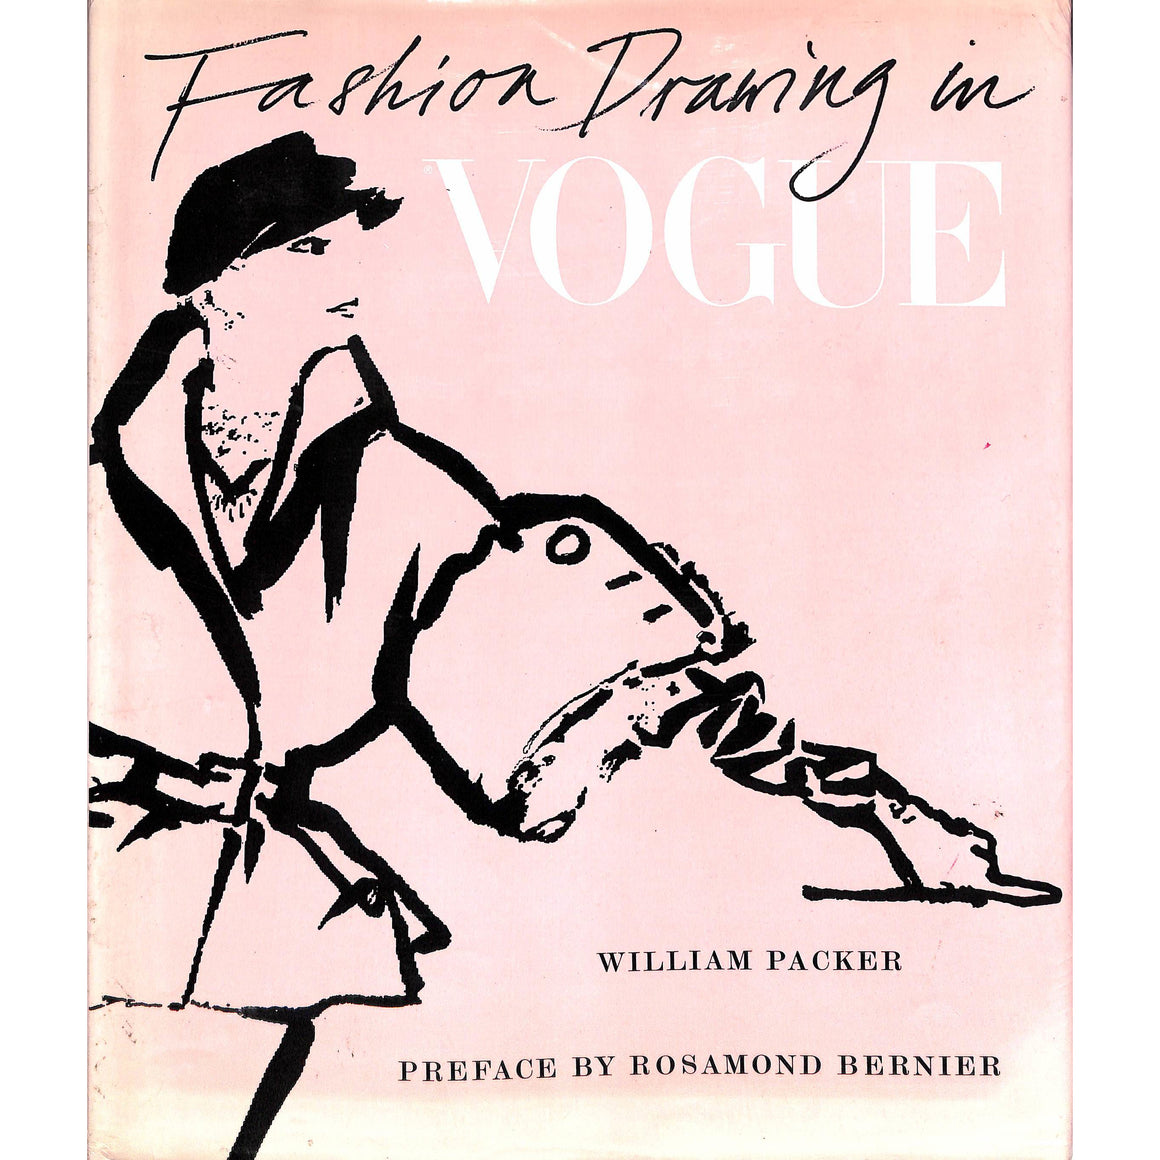 Fashion Drawing In Vogue